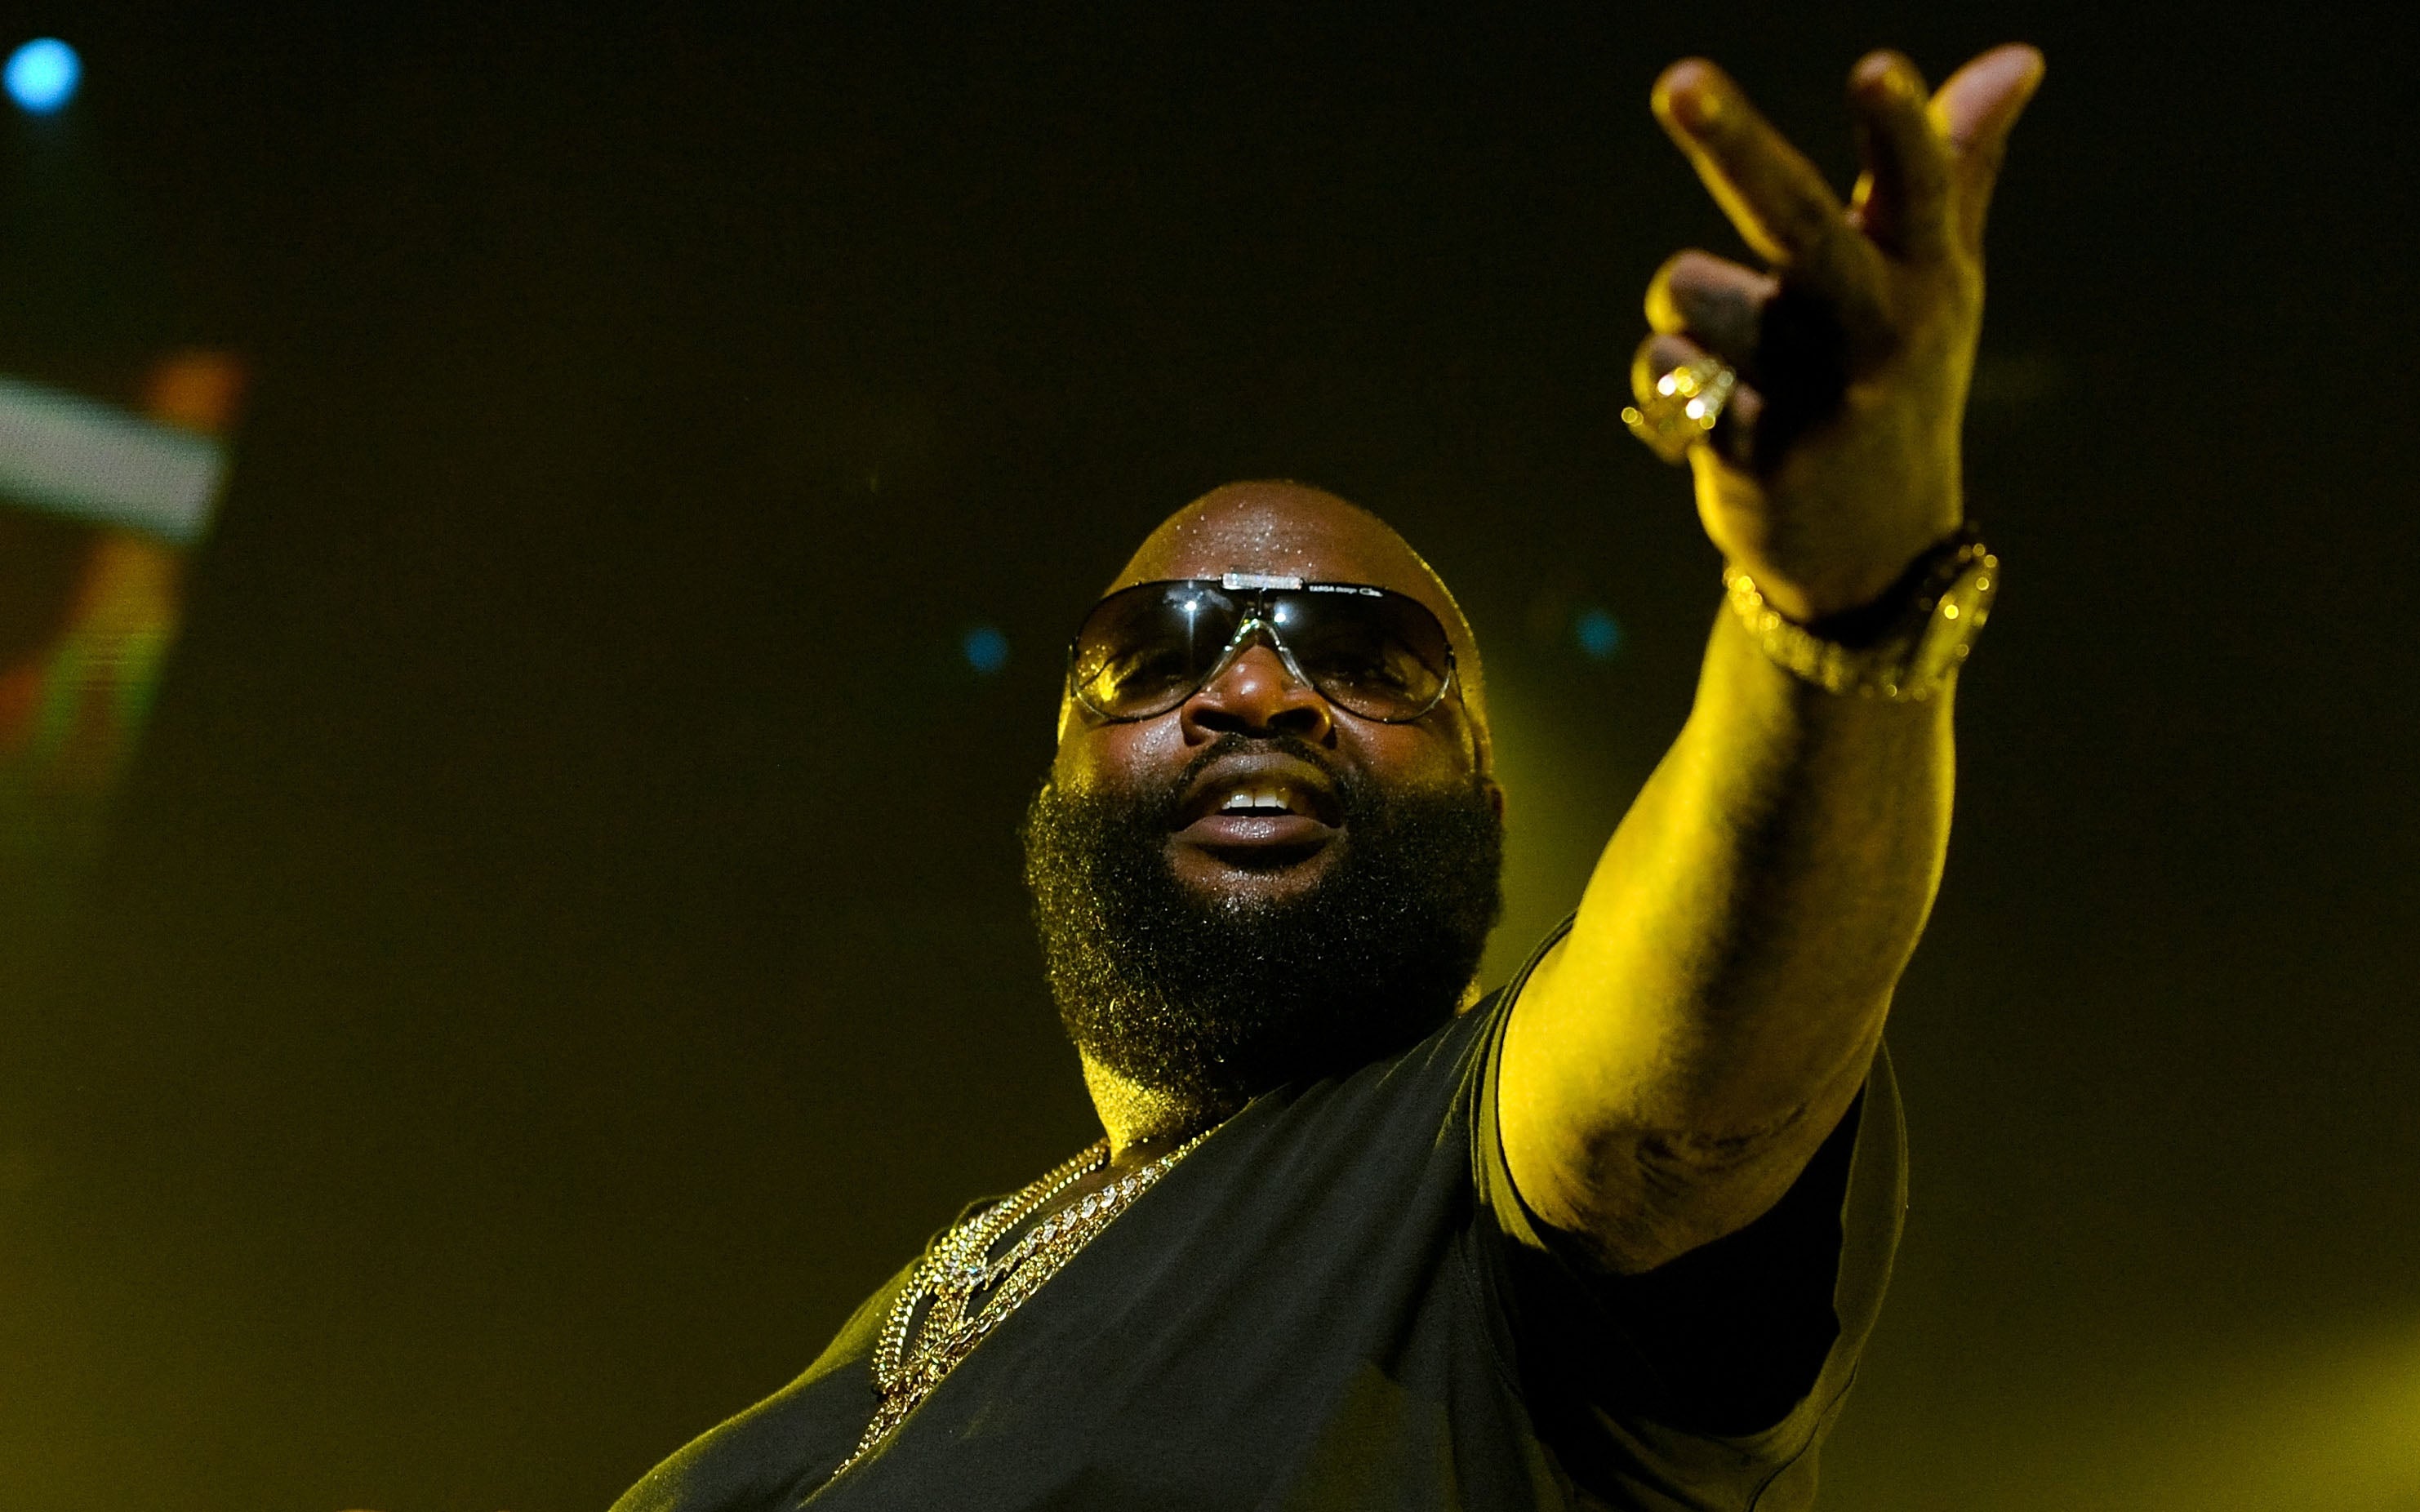 Rapper Rick Ross has won a court battle against a former drug kingpin in order to keep his stage name